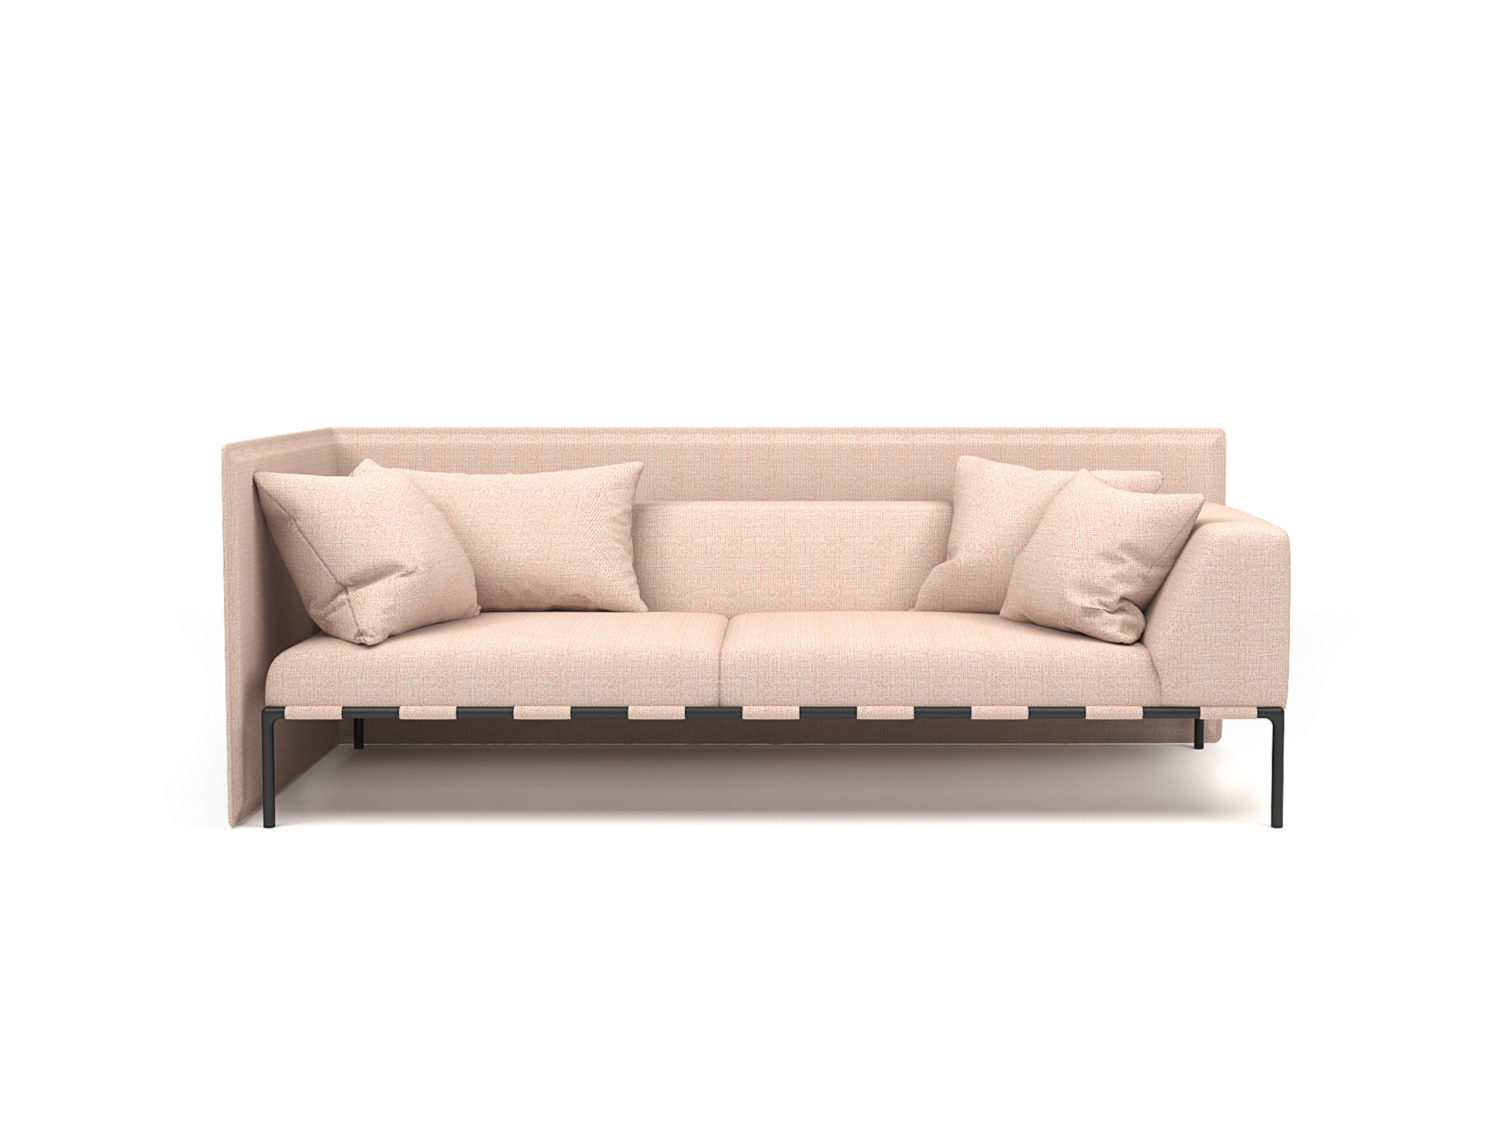 South Sofa By Christophe Pillet 2